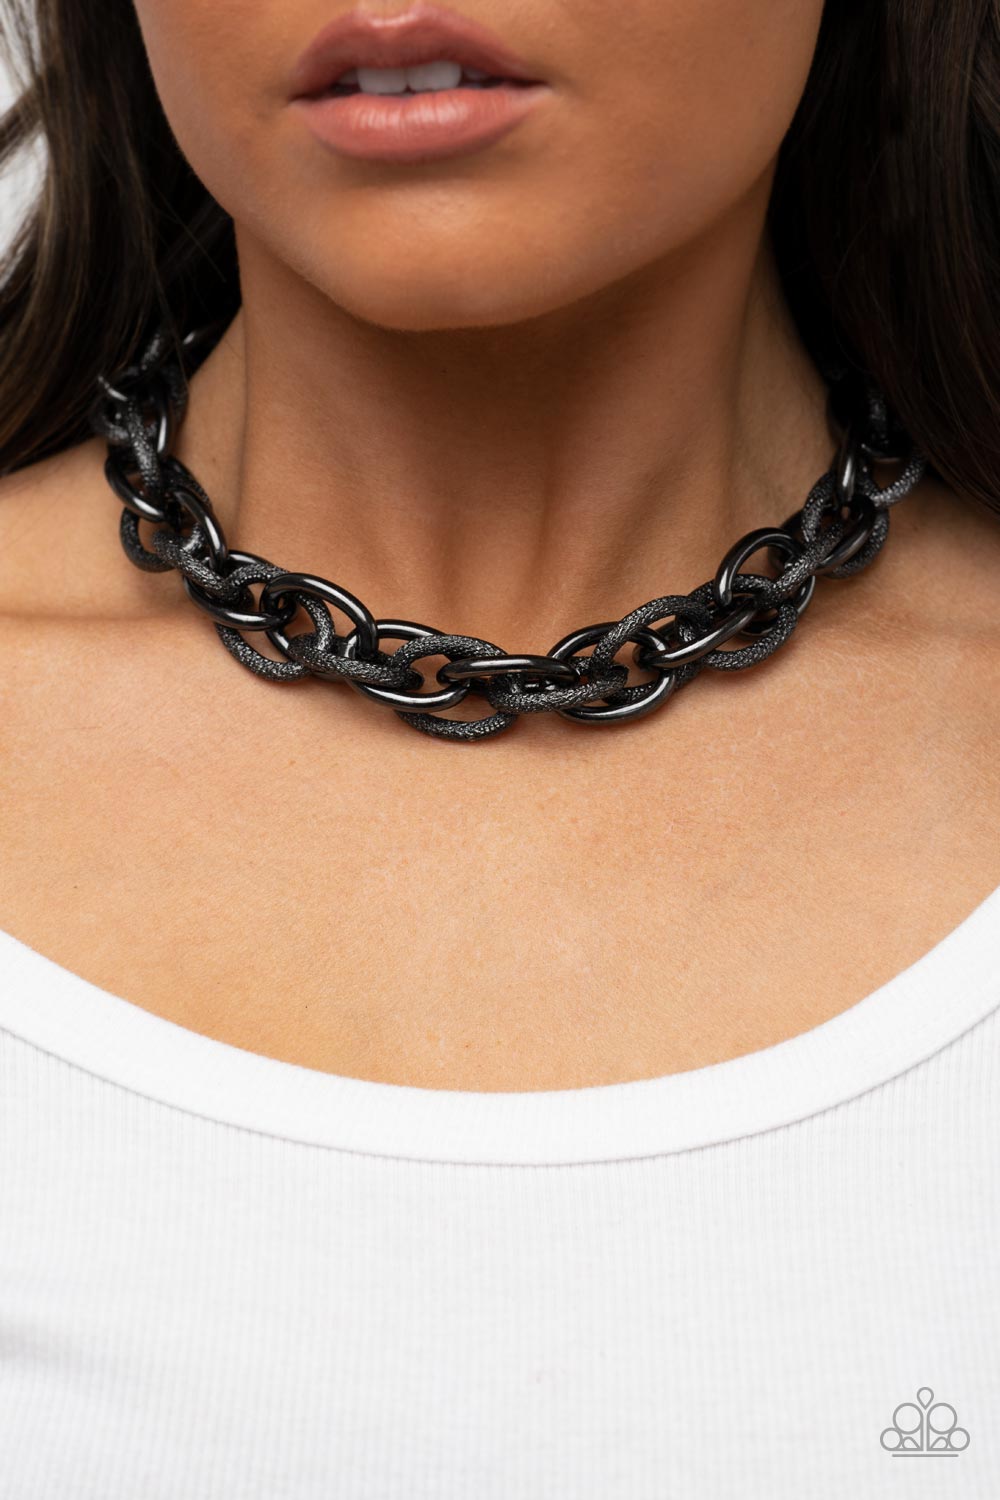 Paparazzi Accessories License to Chill - Black Featuring smooth and glitzy textured finishes, two oversized gunmetal chains interlock into a single chain below the collar for an intense industrial display. Features an adjustable clasp closure. Sold as one